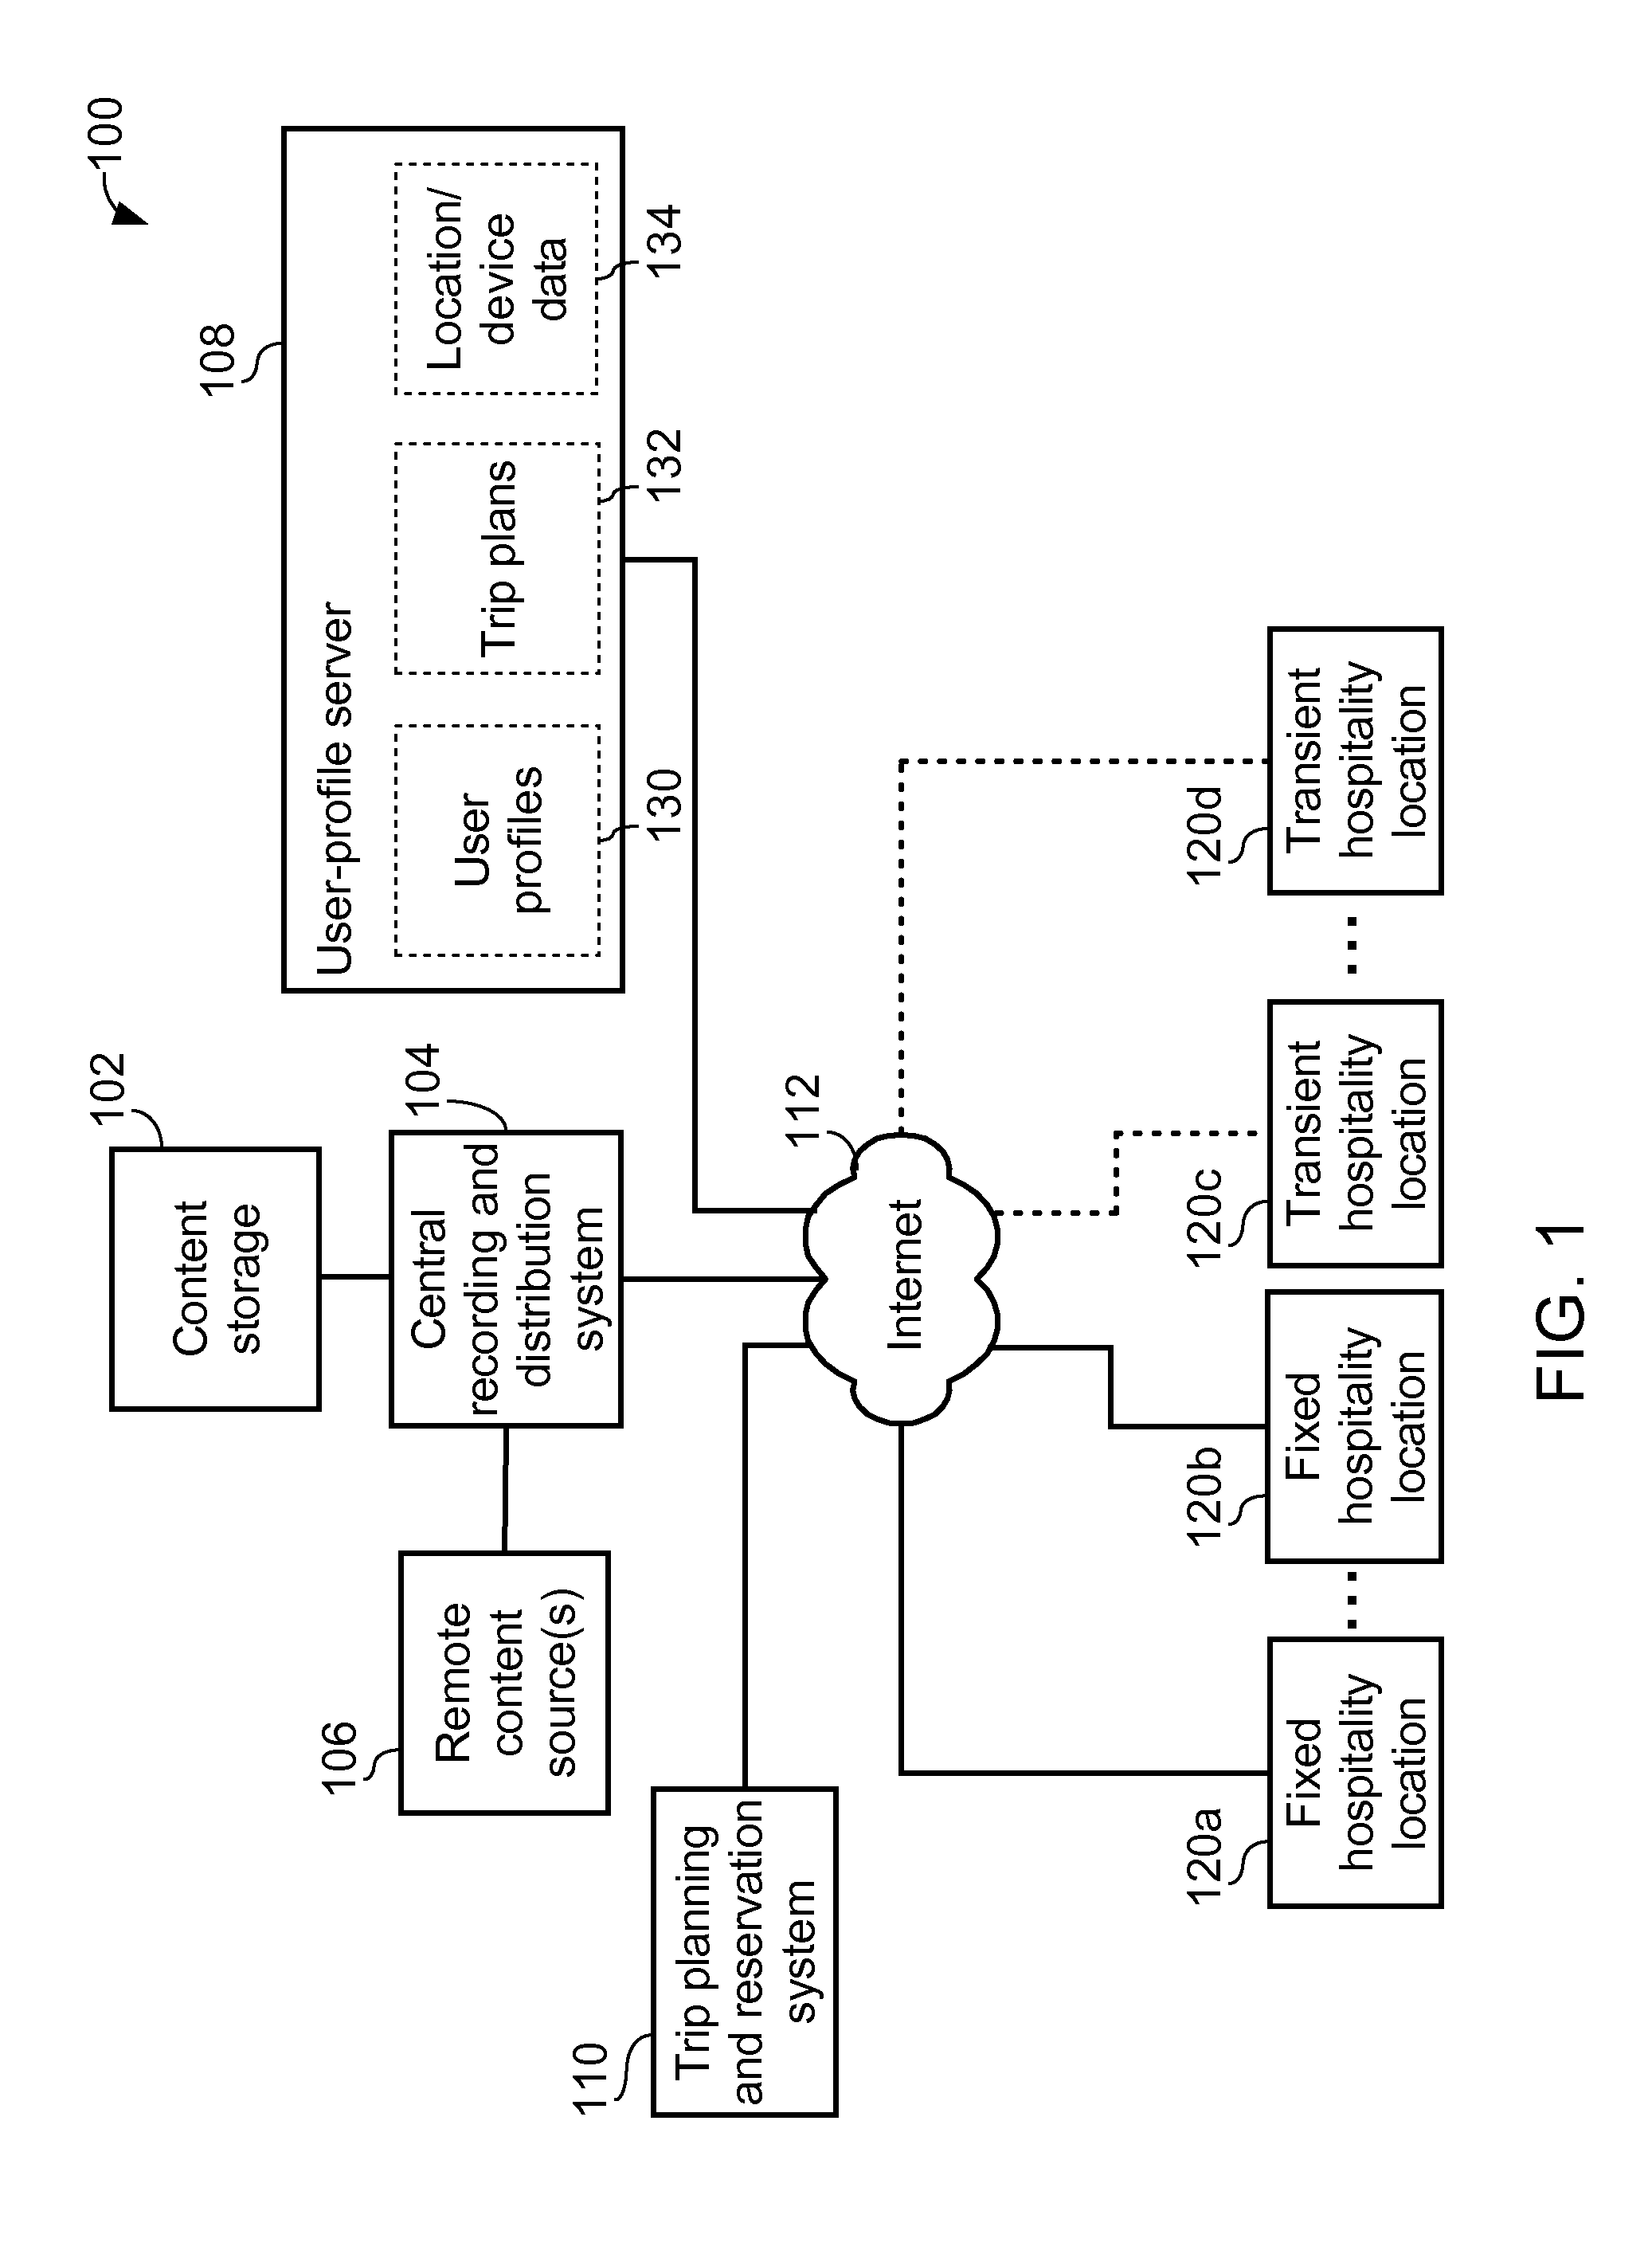 Method of providing user-tailored entertainment experience at hospitality location and hospitality media system thereof